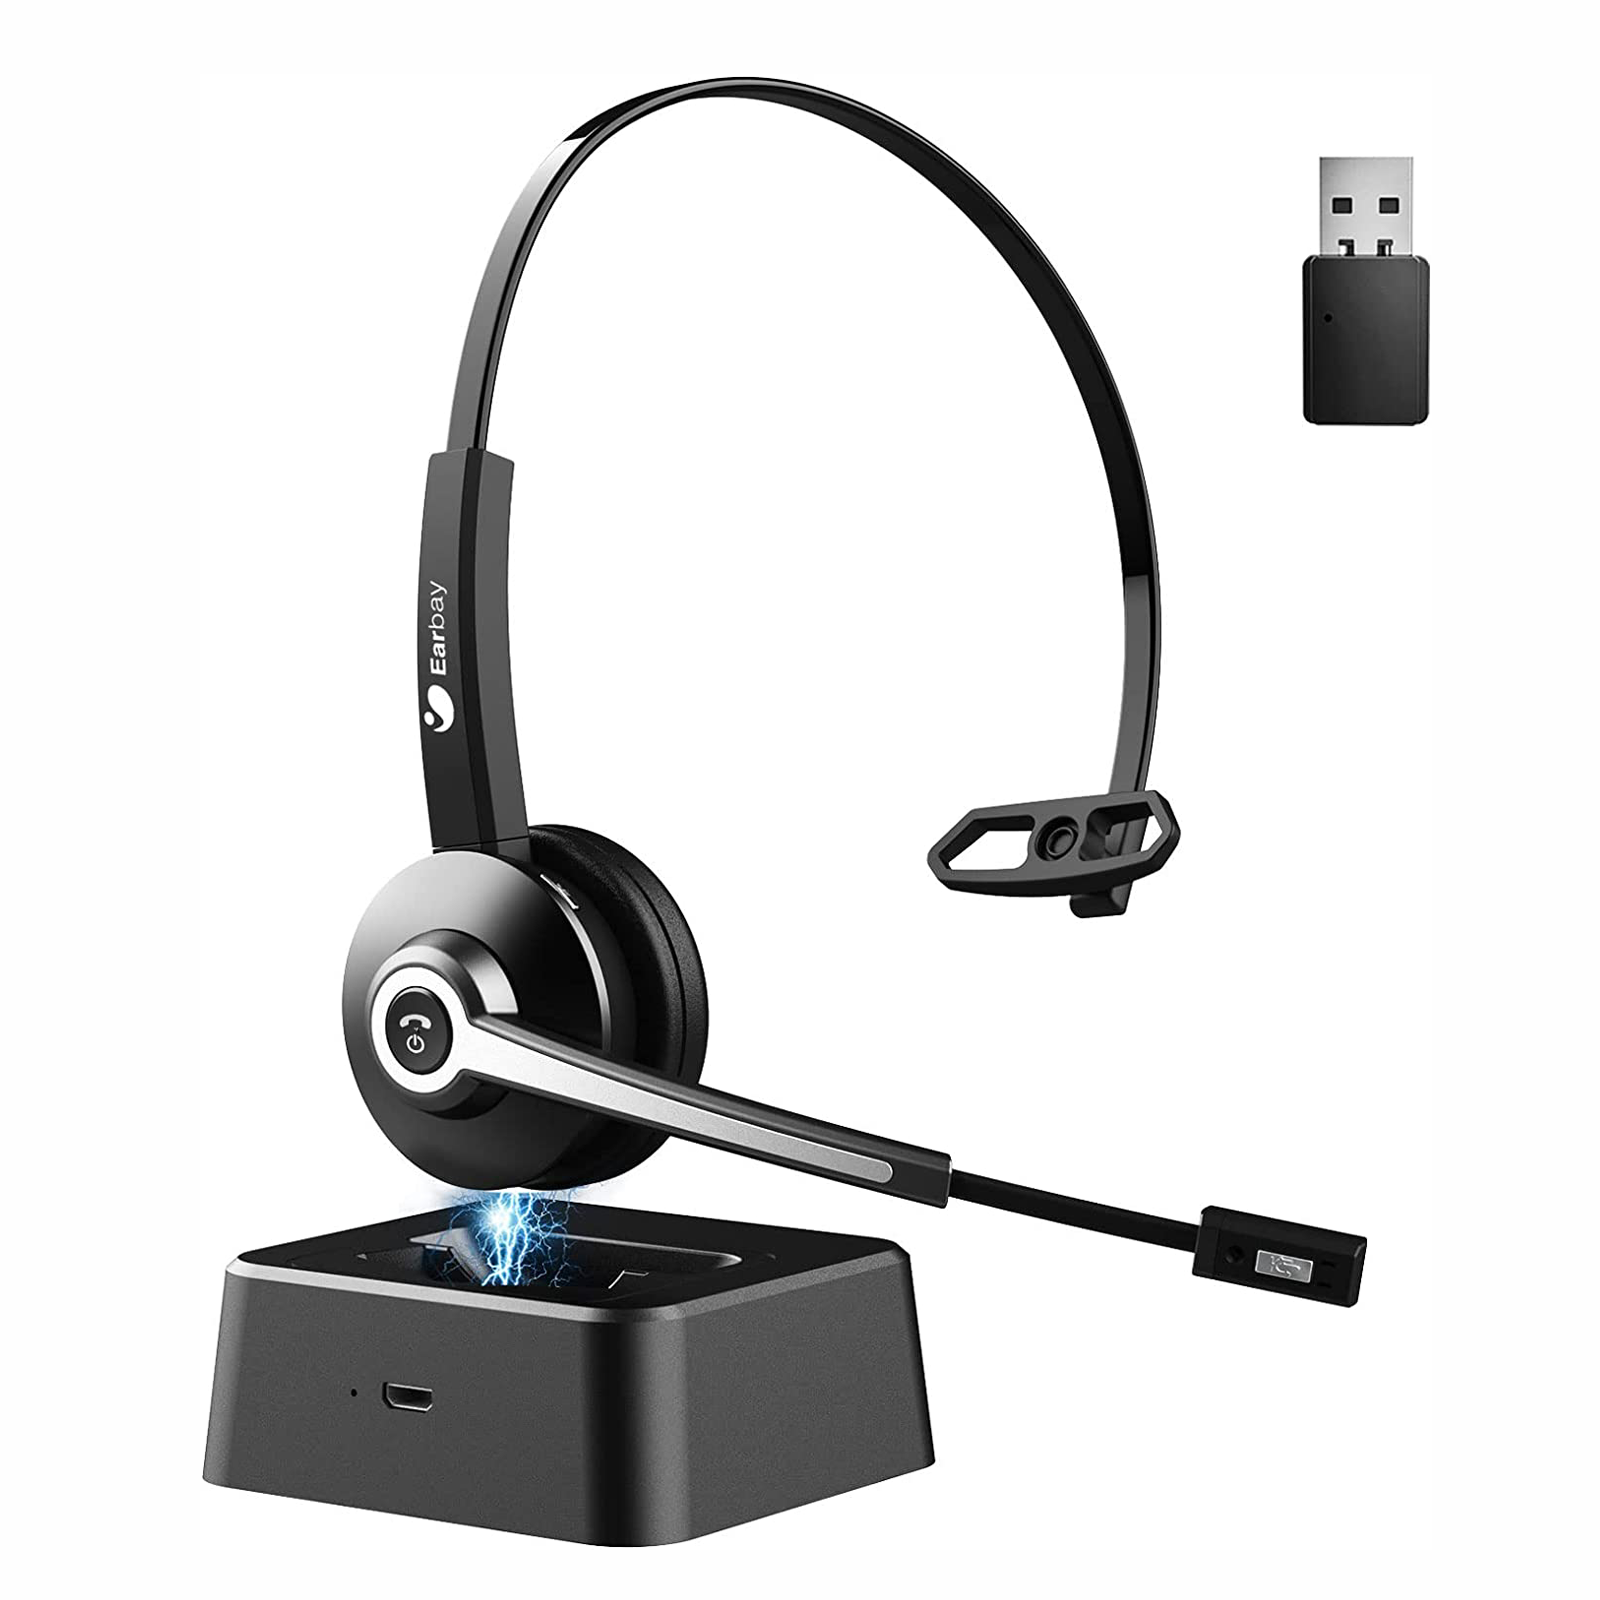 Earbay Trucker Wireless Headset with Microphone, USB Dongle & Charging Base BT681C-DG